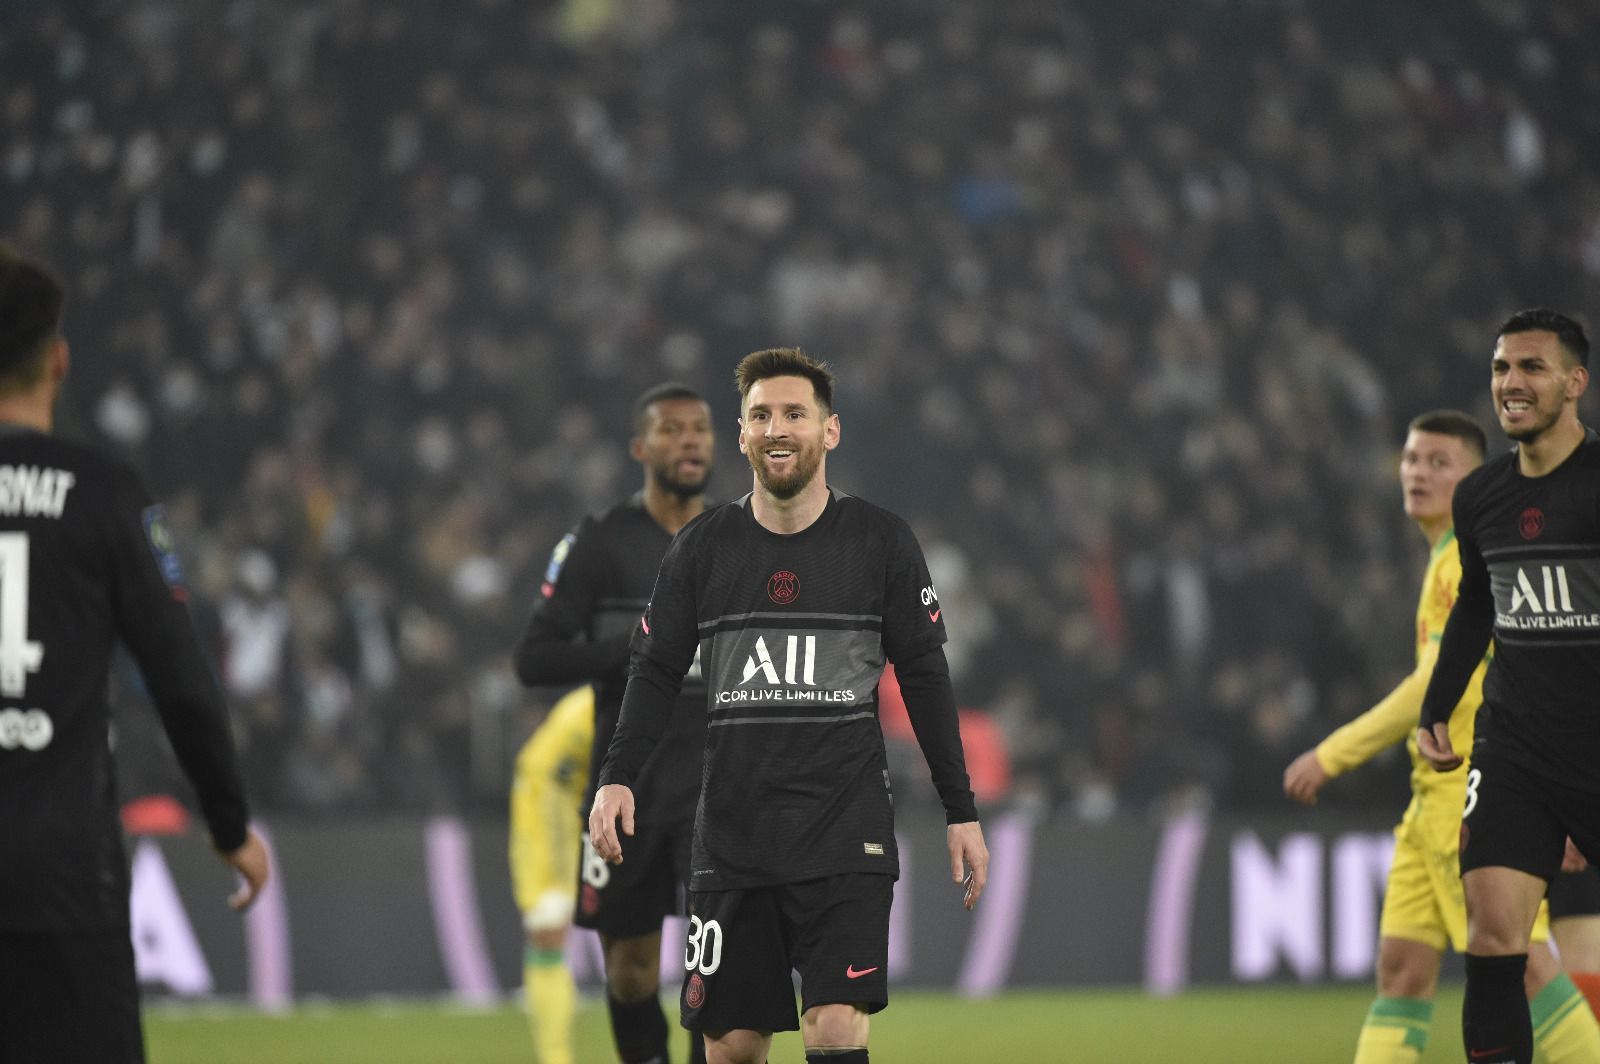 Lionel Messi scored his first league goal for PSG in their 3-1 win over Nantes on Saturday.